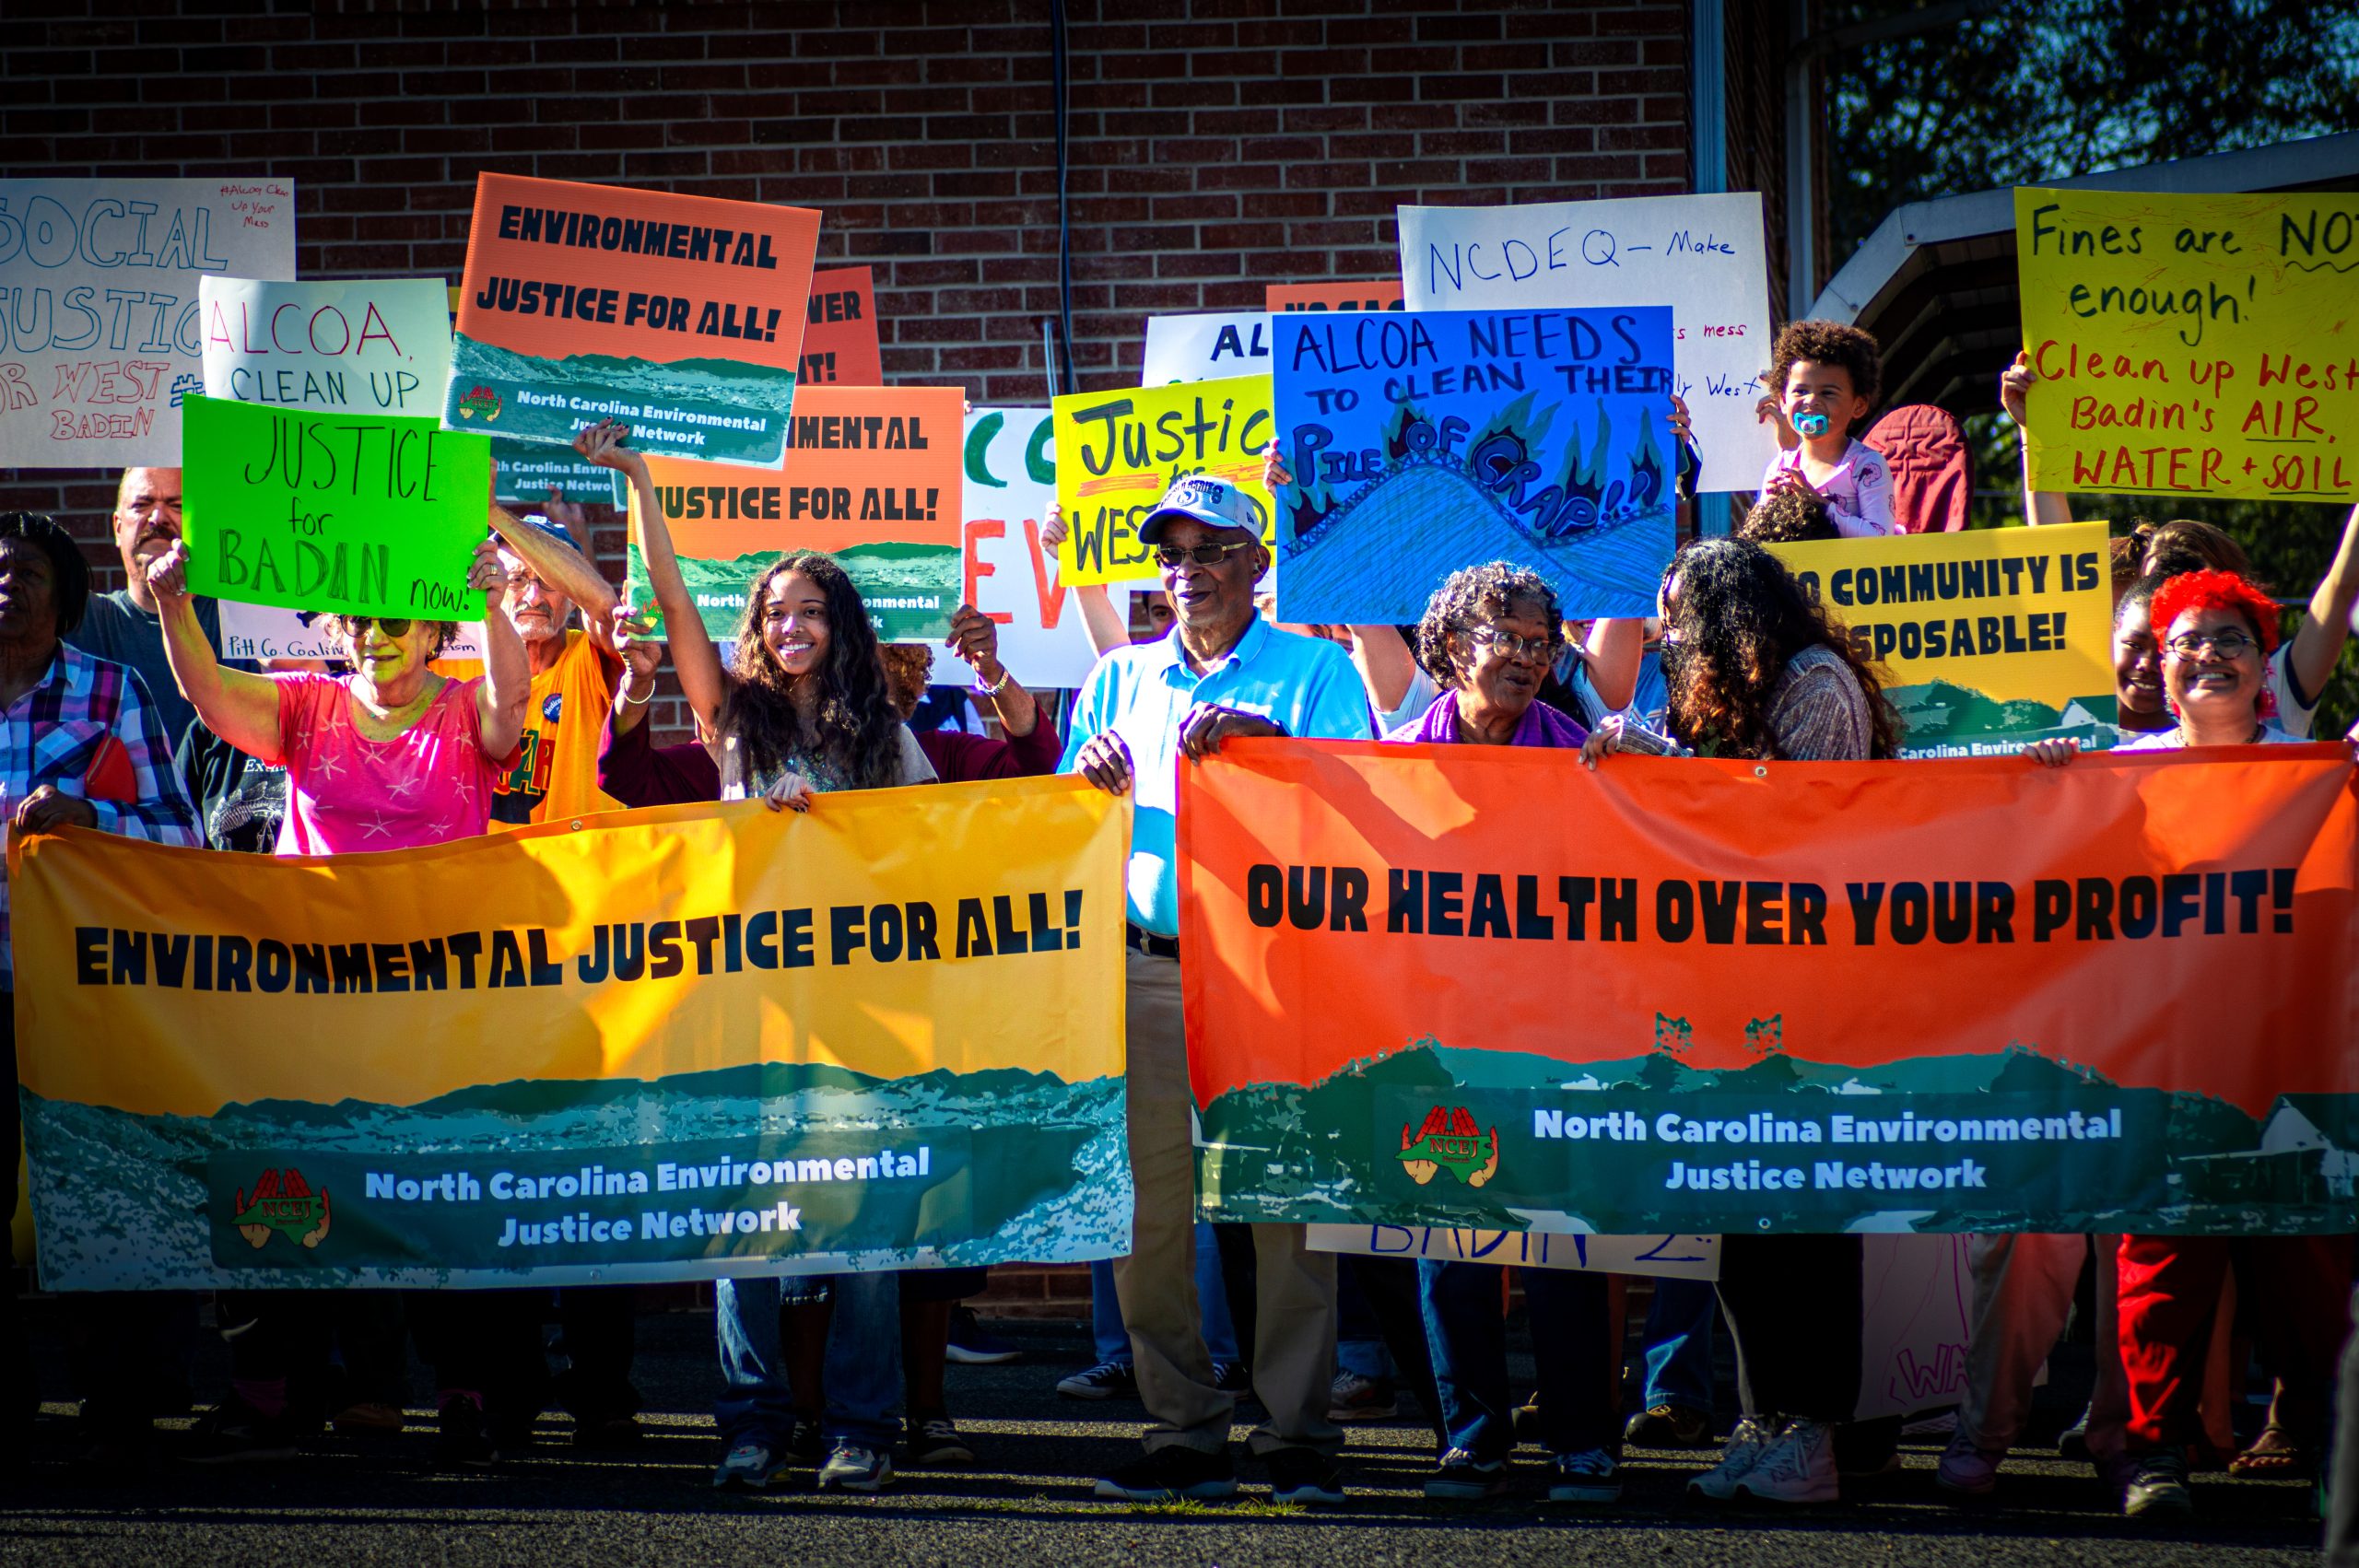 A group of people marching with signs advocating for health and justice.